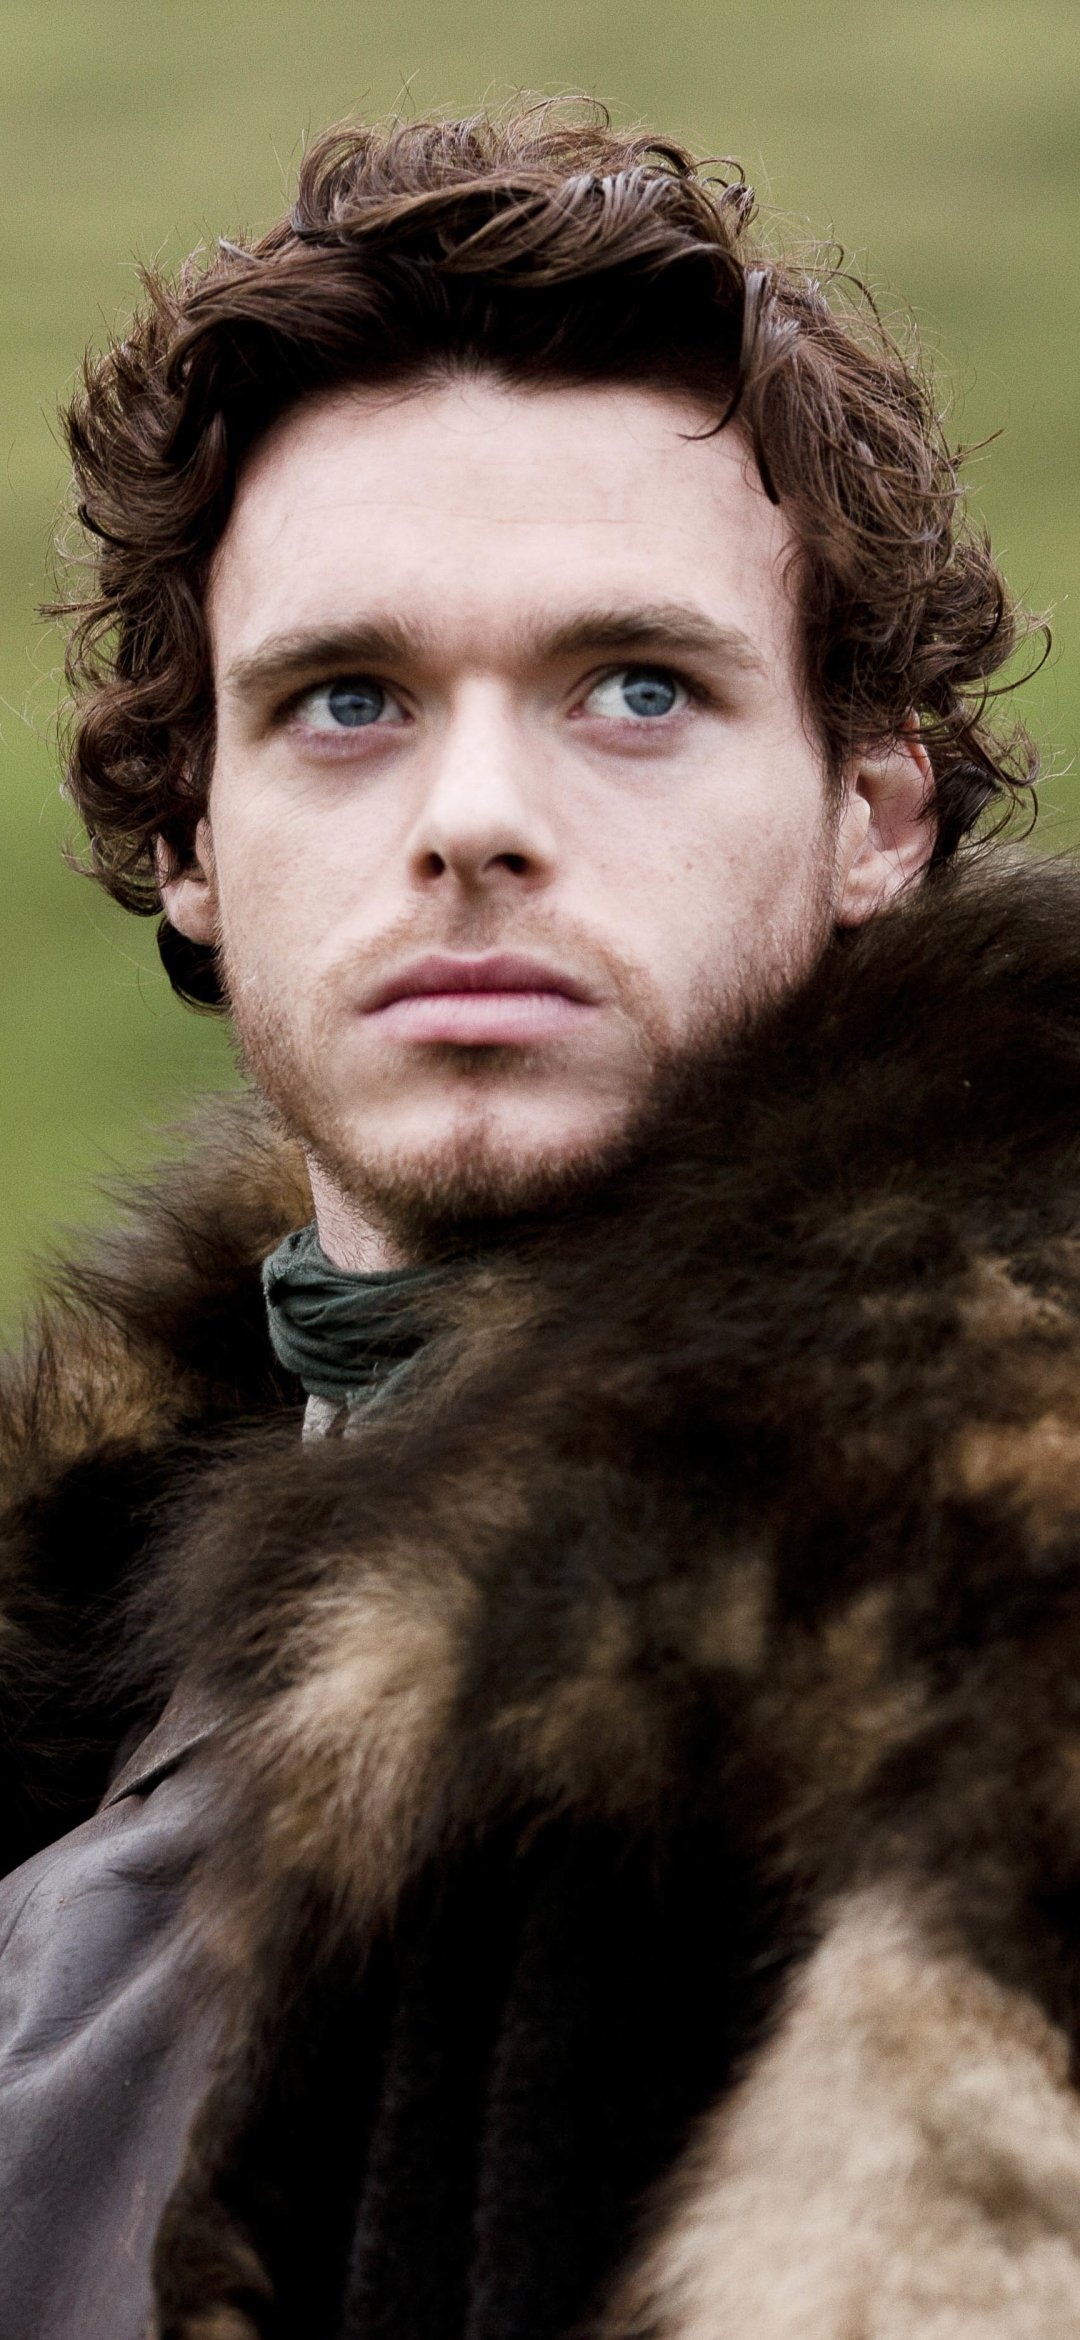 Richard Madden: Acting Lord of Winterfell, Game of Thrones. 1080x2340 HD Background.